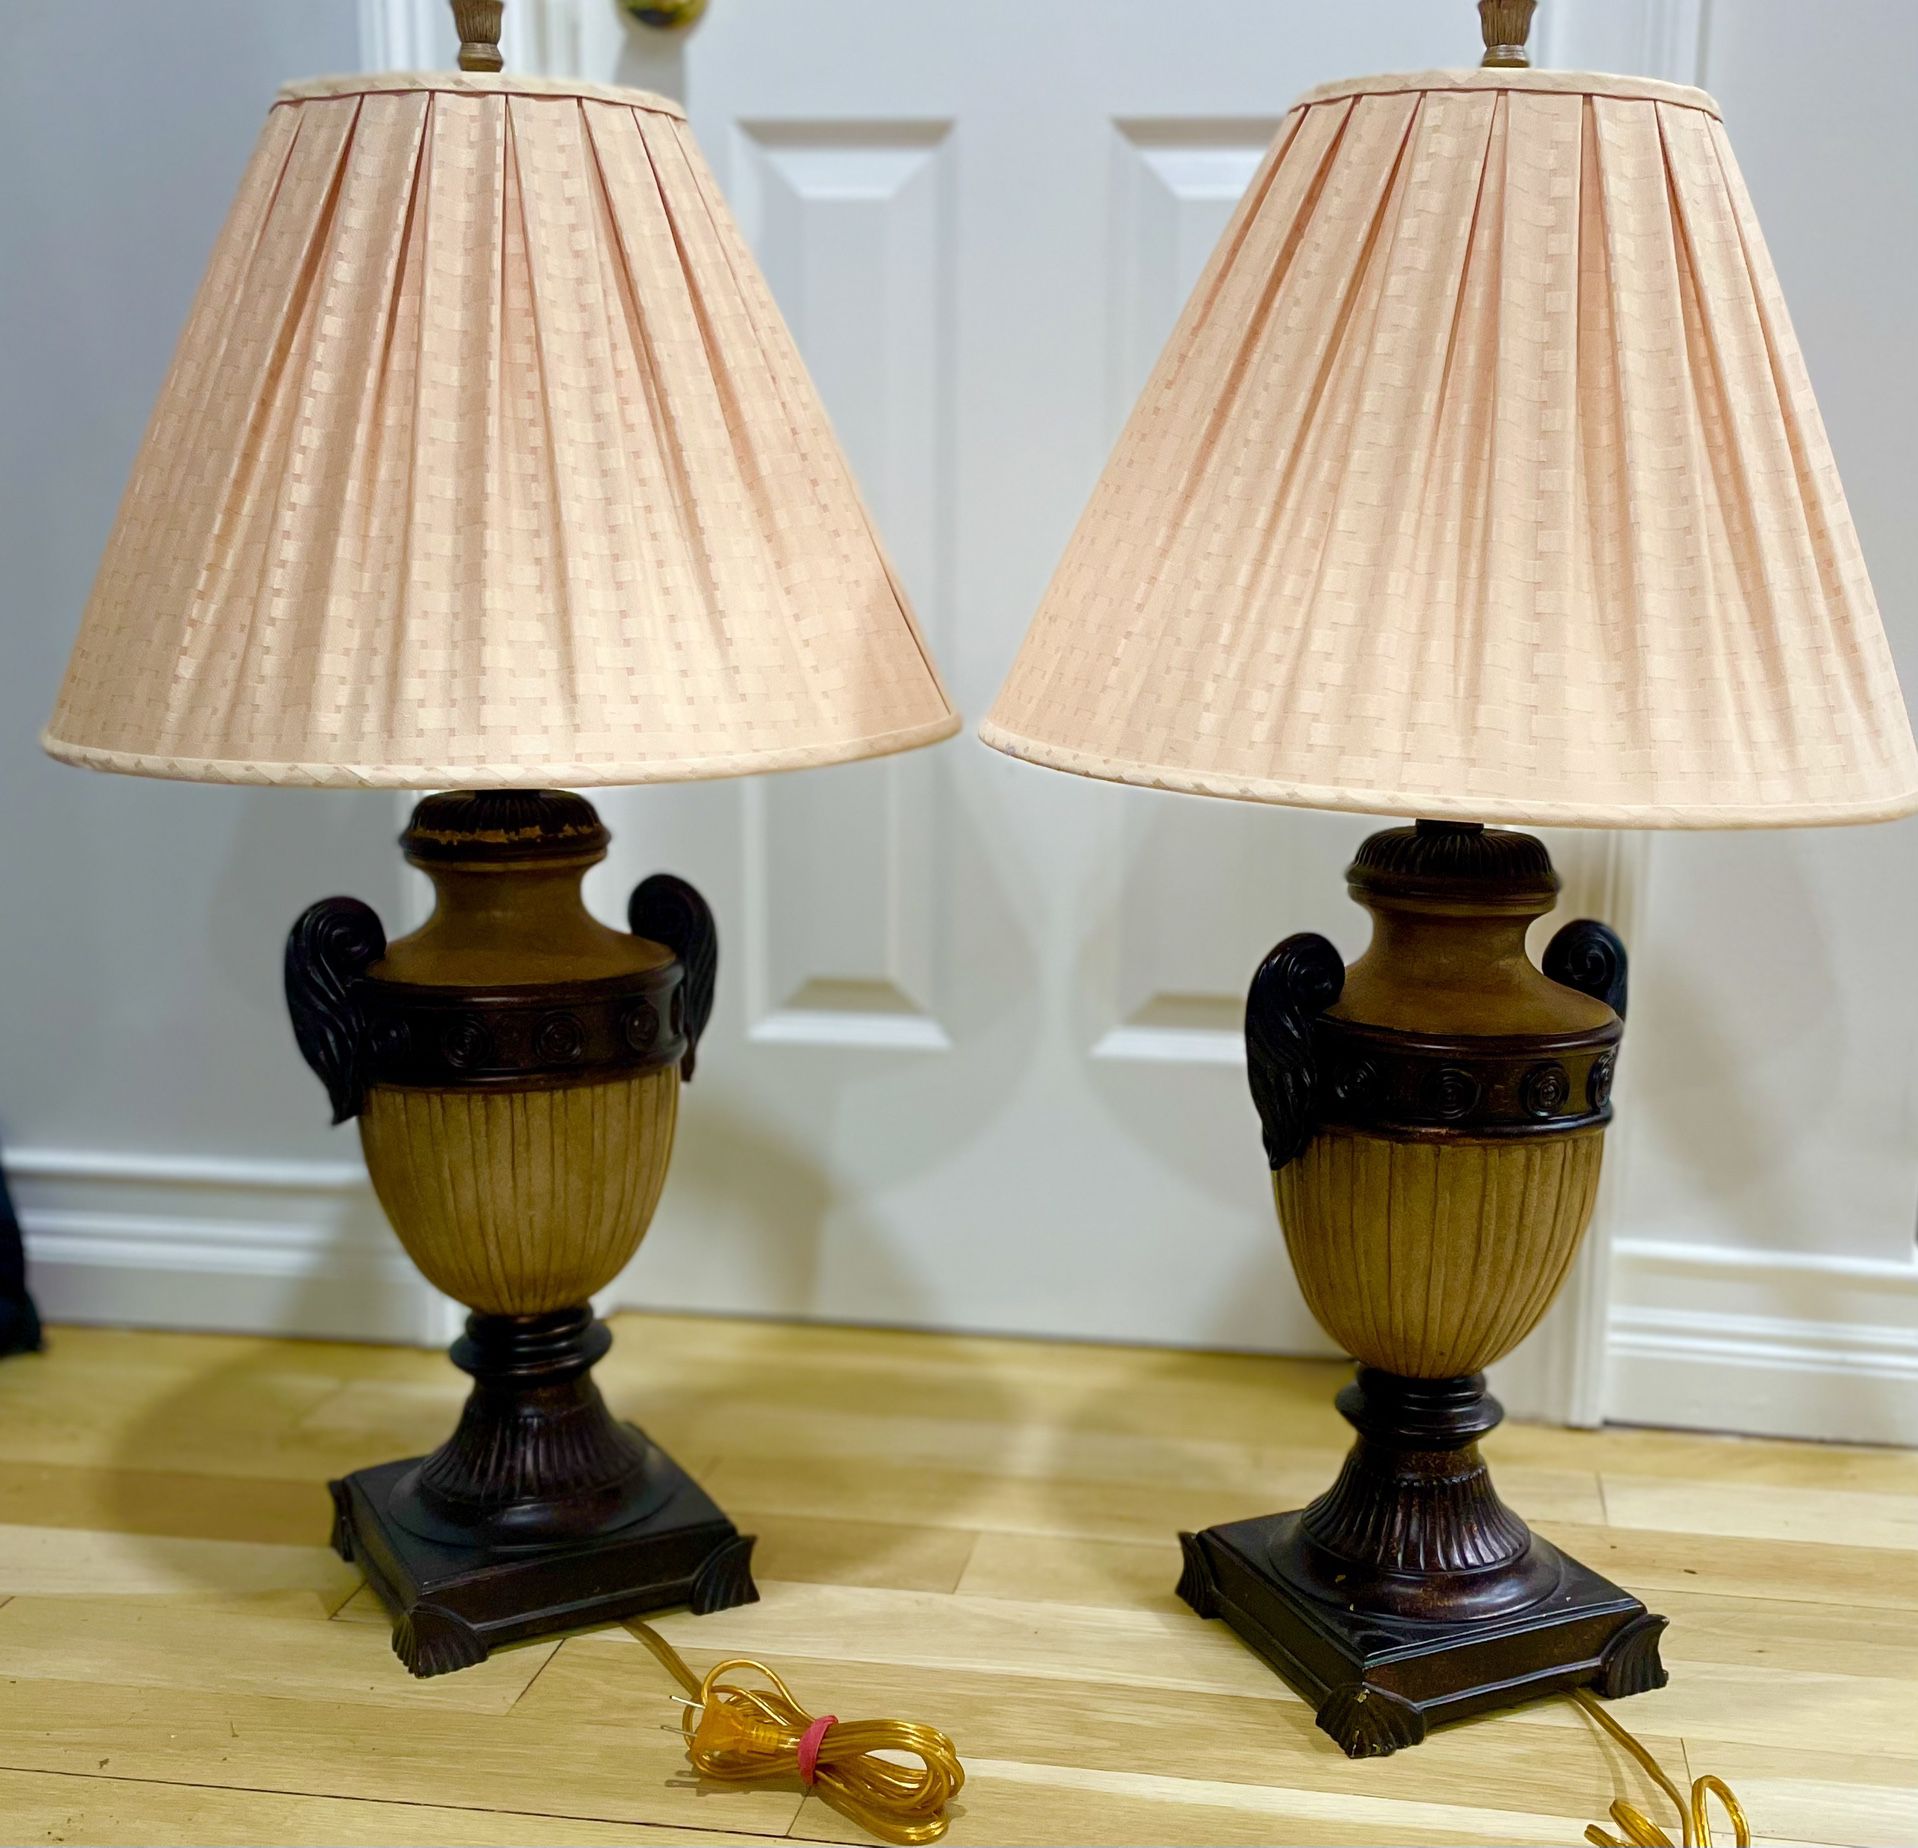 Beautiful Estate Sale Lamps. Hand Made Shades. 